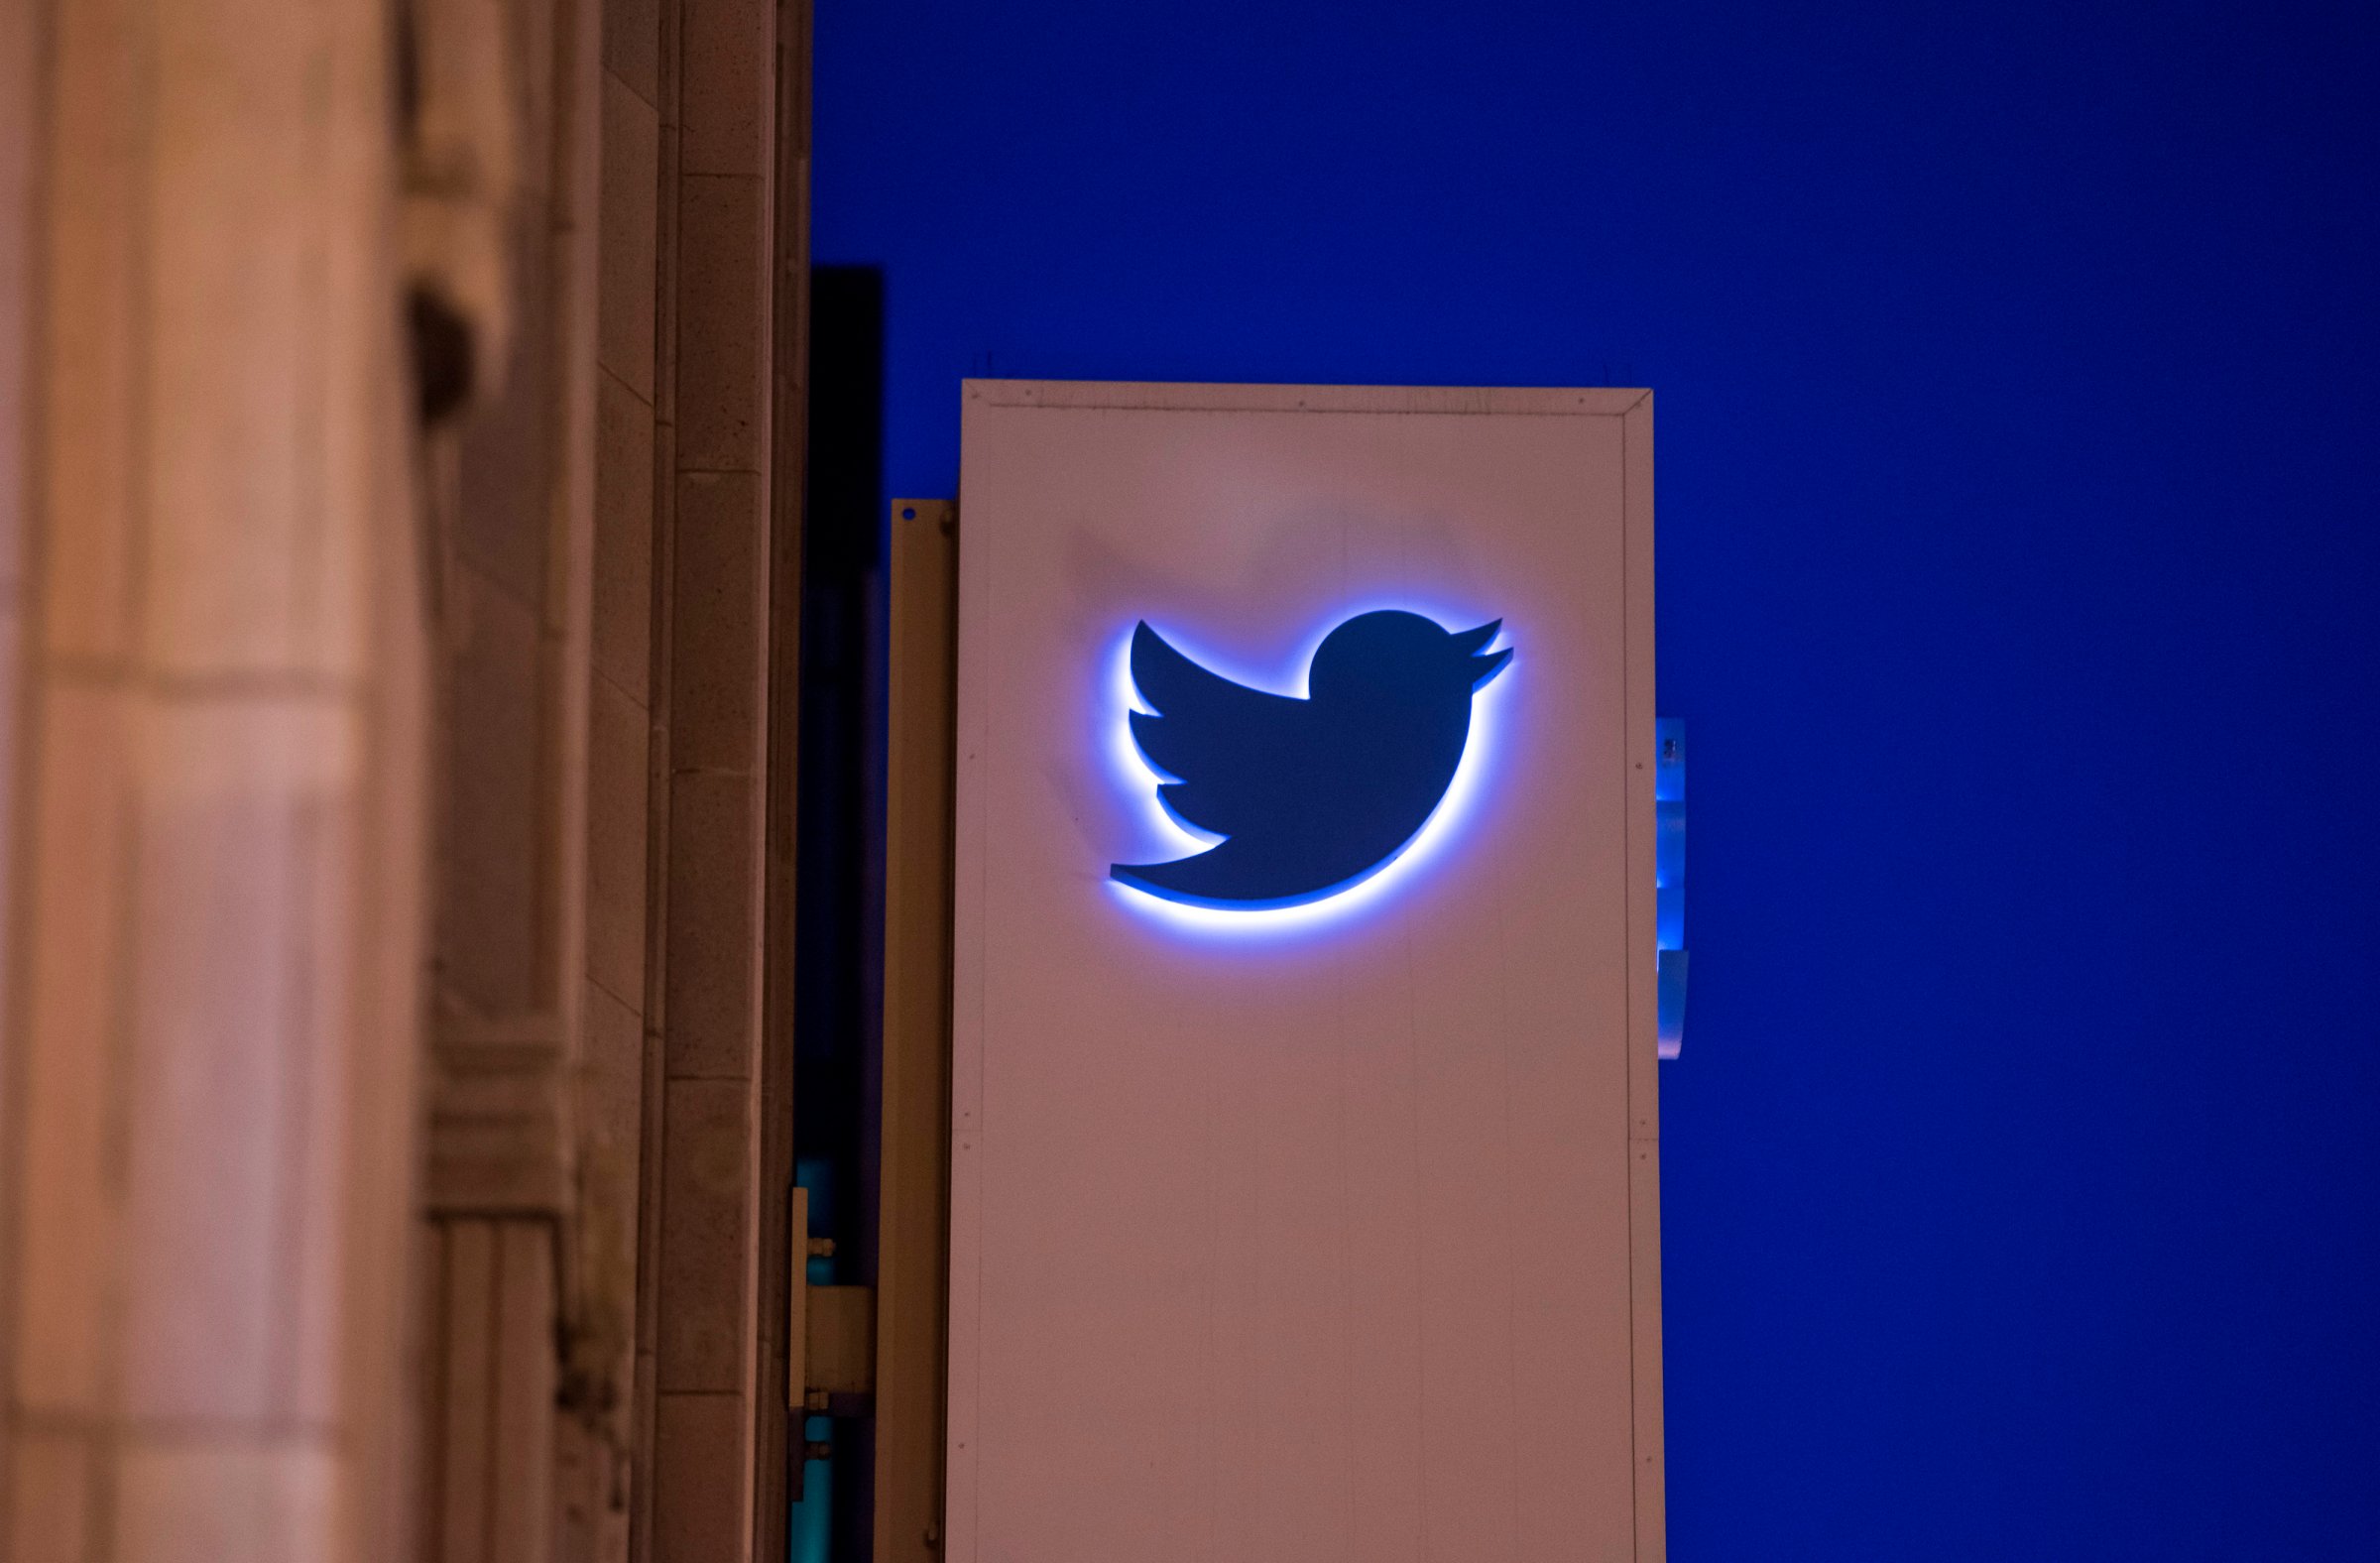 The Twitter Inc. logo and signage is displayed on the facade of the company's headquarters in San Francisco, California, U.S., on Wednesday, Oct. 21, 2015. Twitter Inc. is expected to release earnings figures on Oct. 27. Photographer: David Paul Morris/Bloomberg